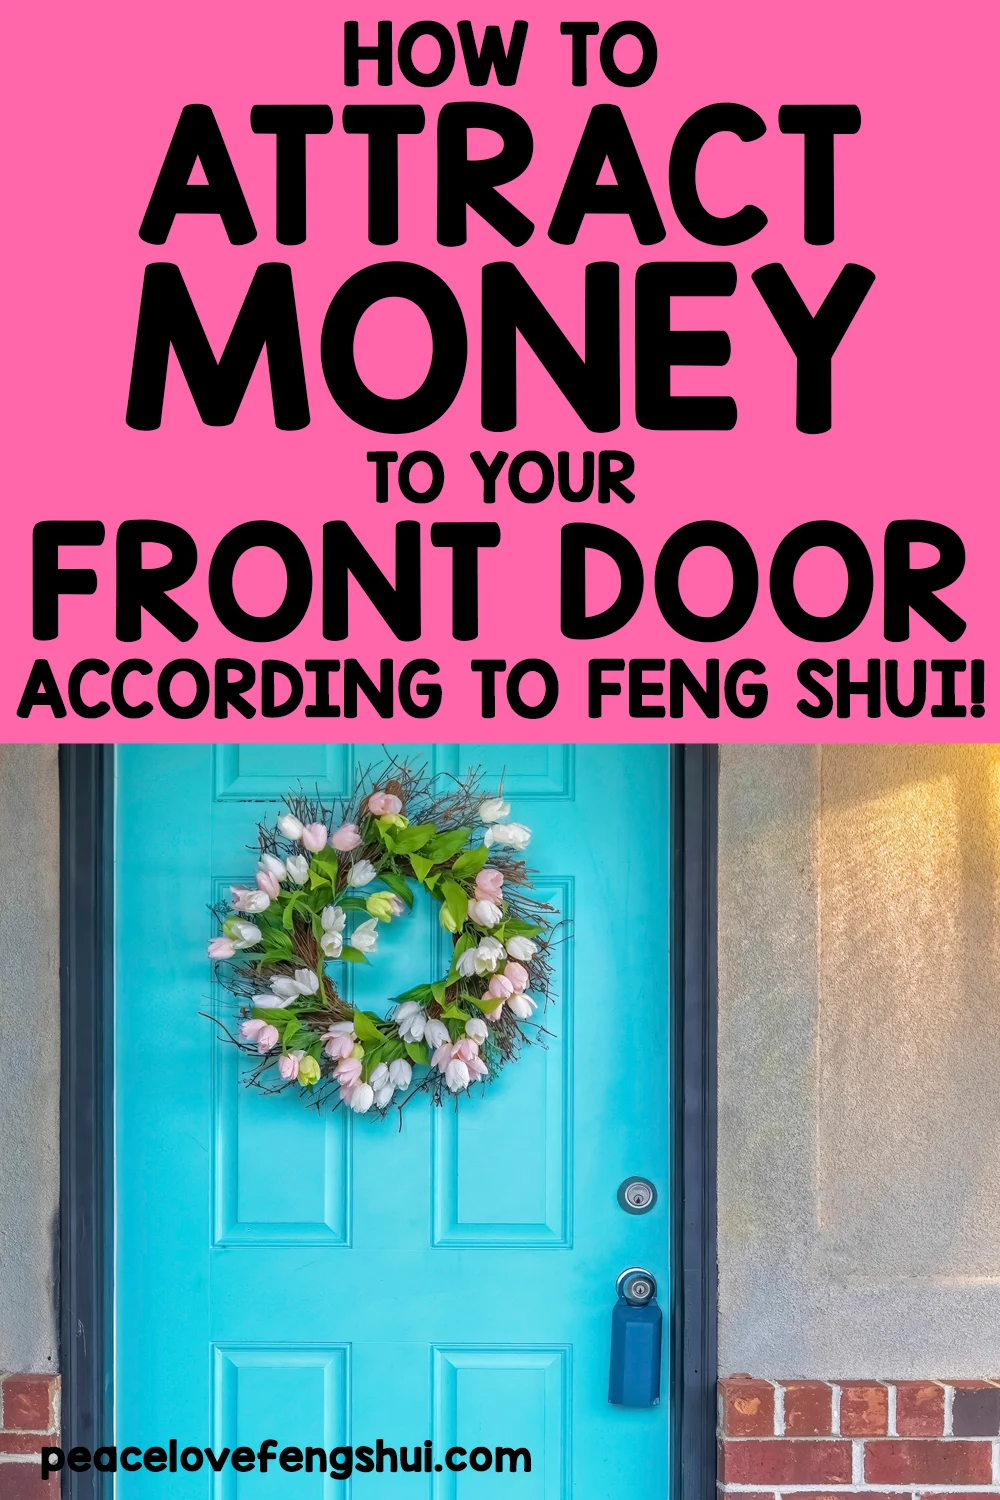 how to attract money to your front door according to feng shui!